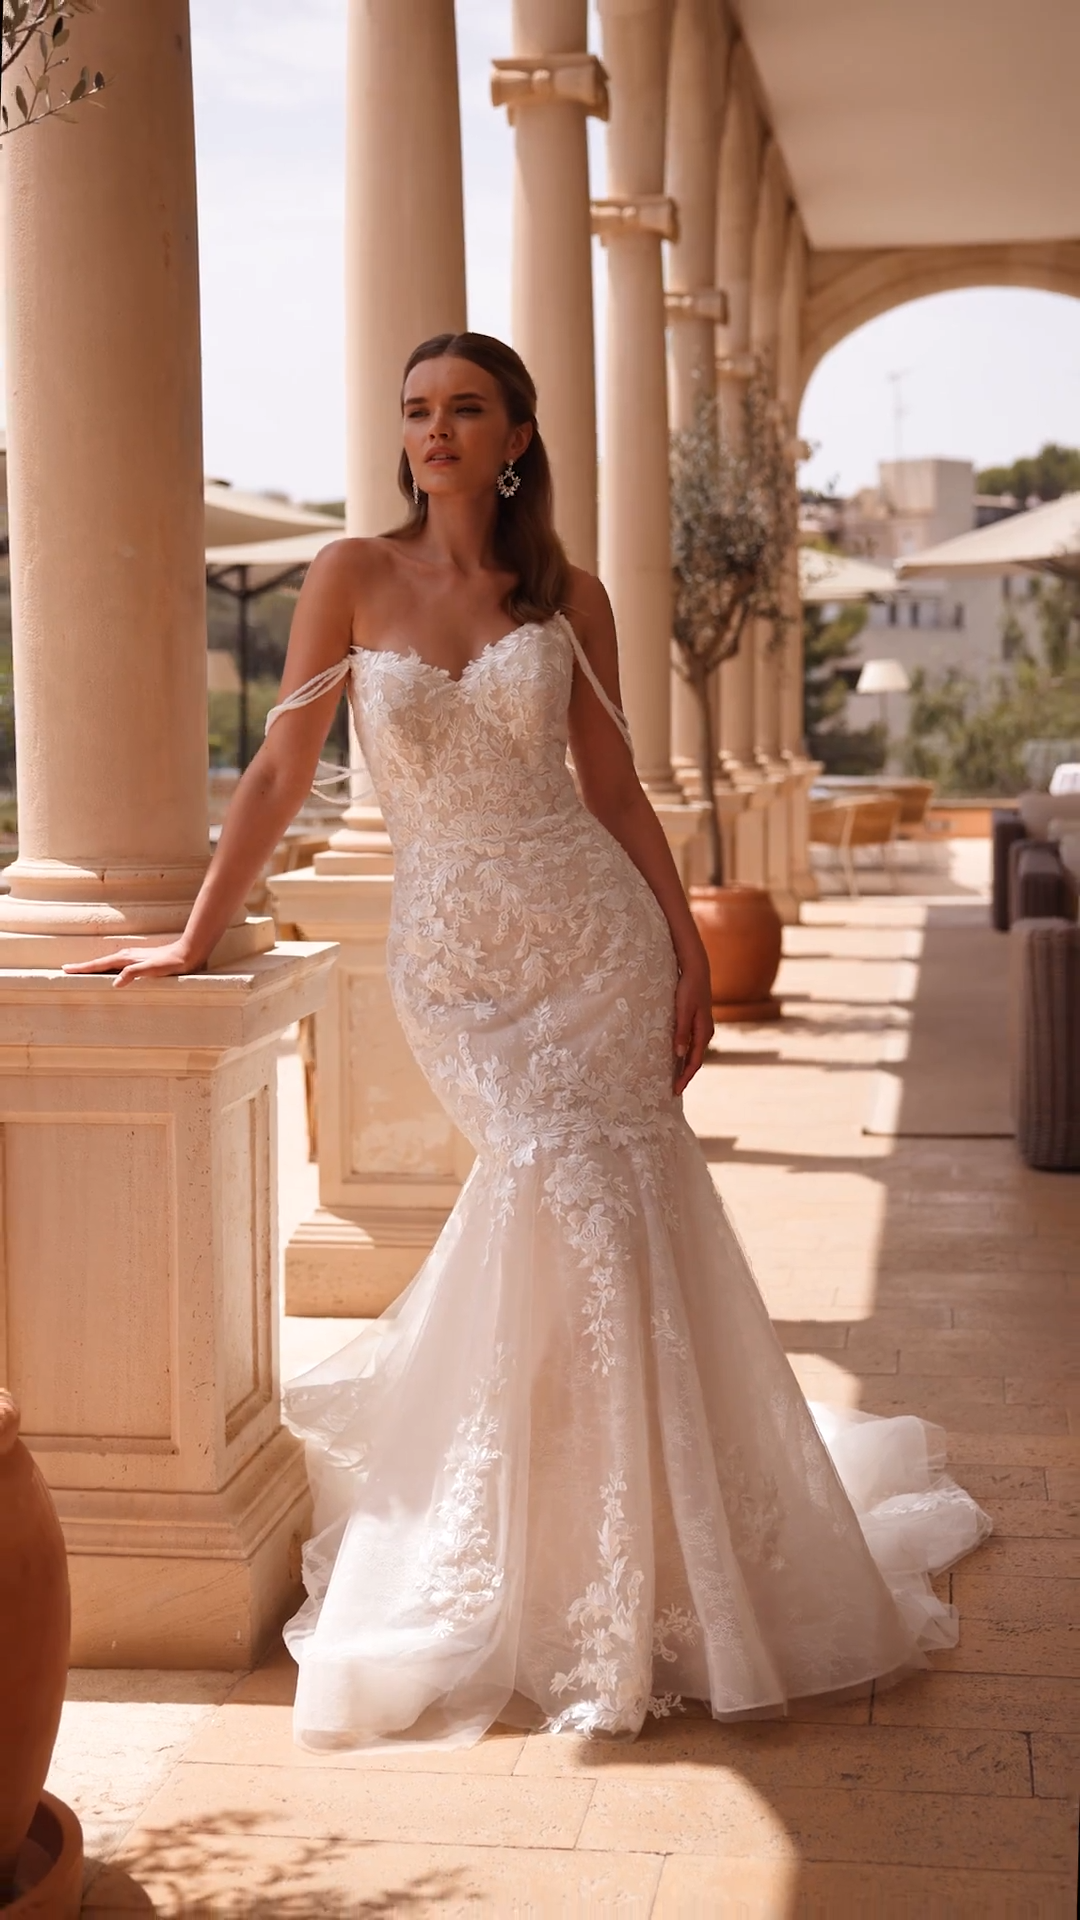 Bride wearing leaf lace wedding dress with cat eye neckline and detachable beaded strands